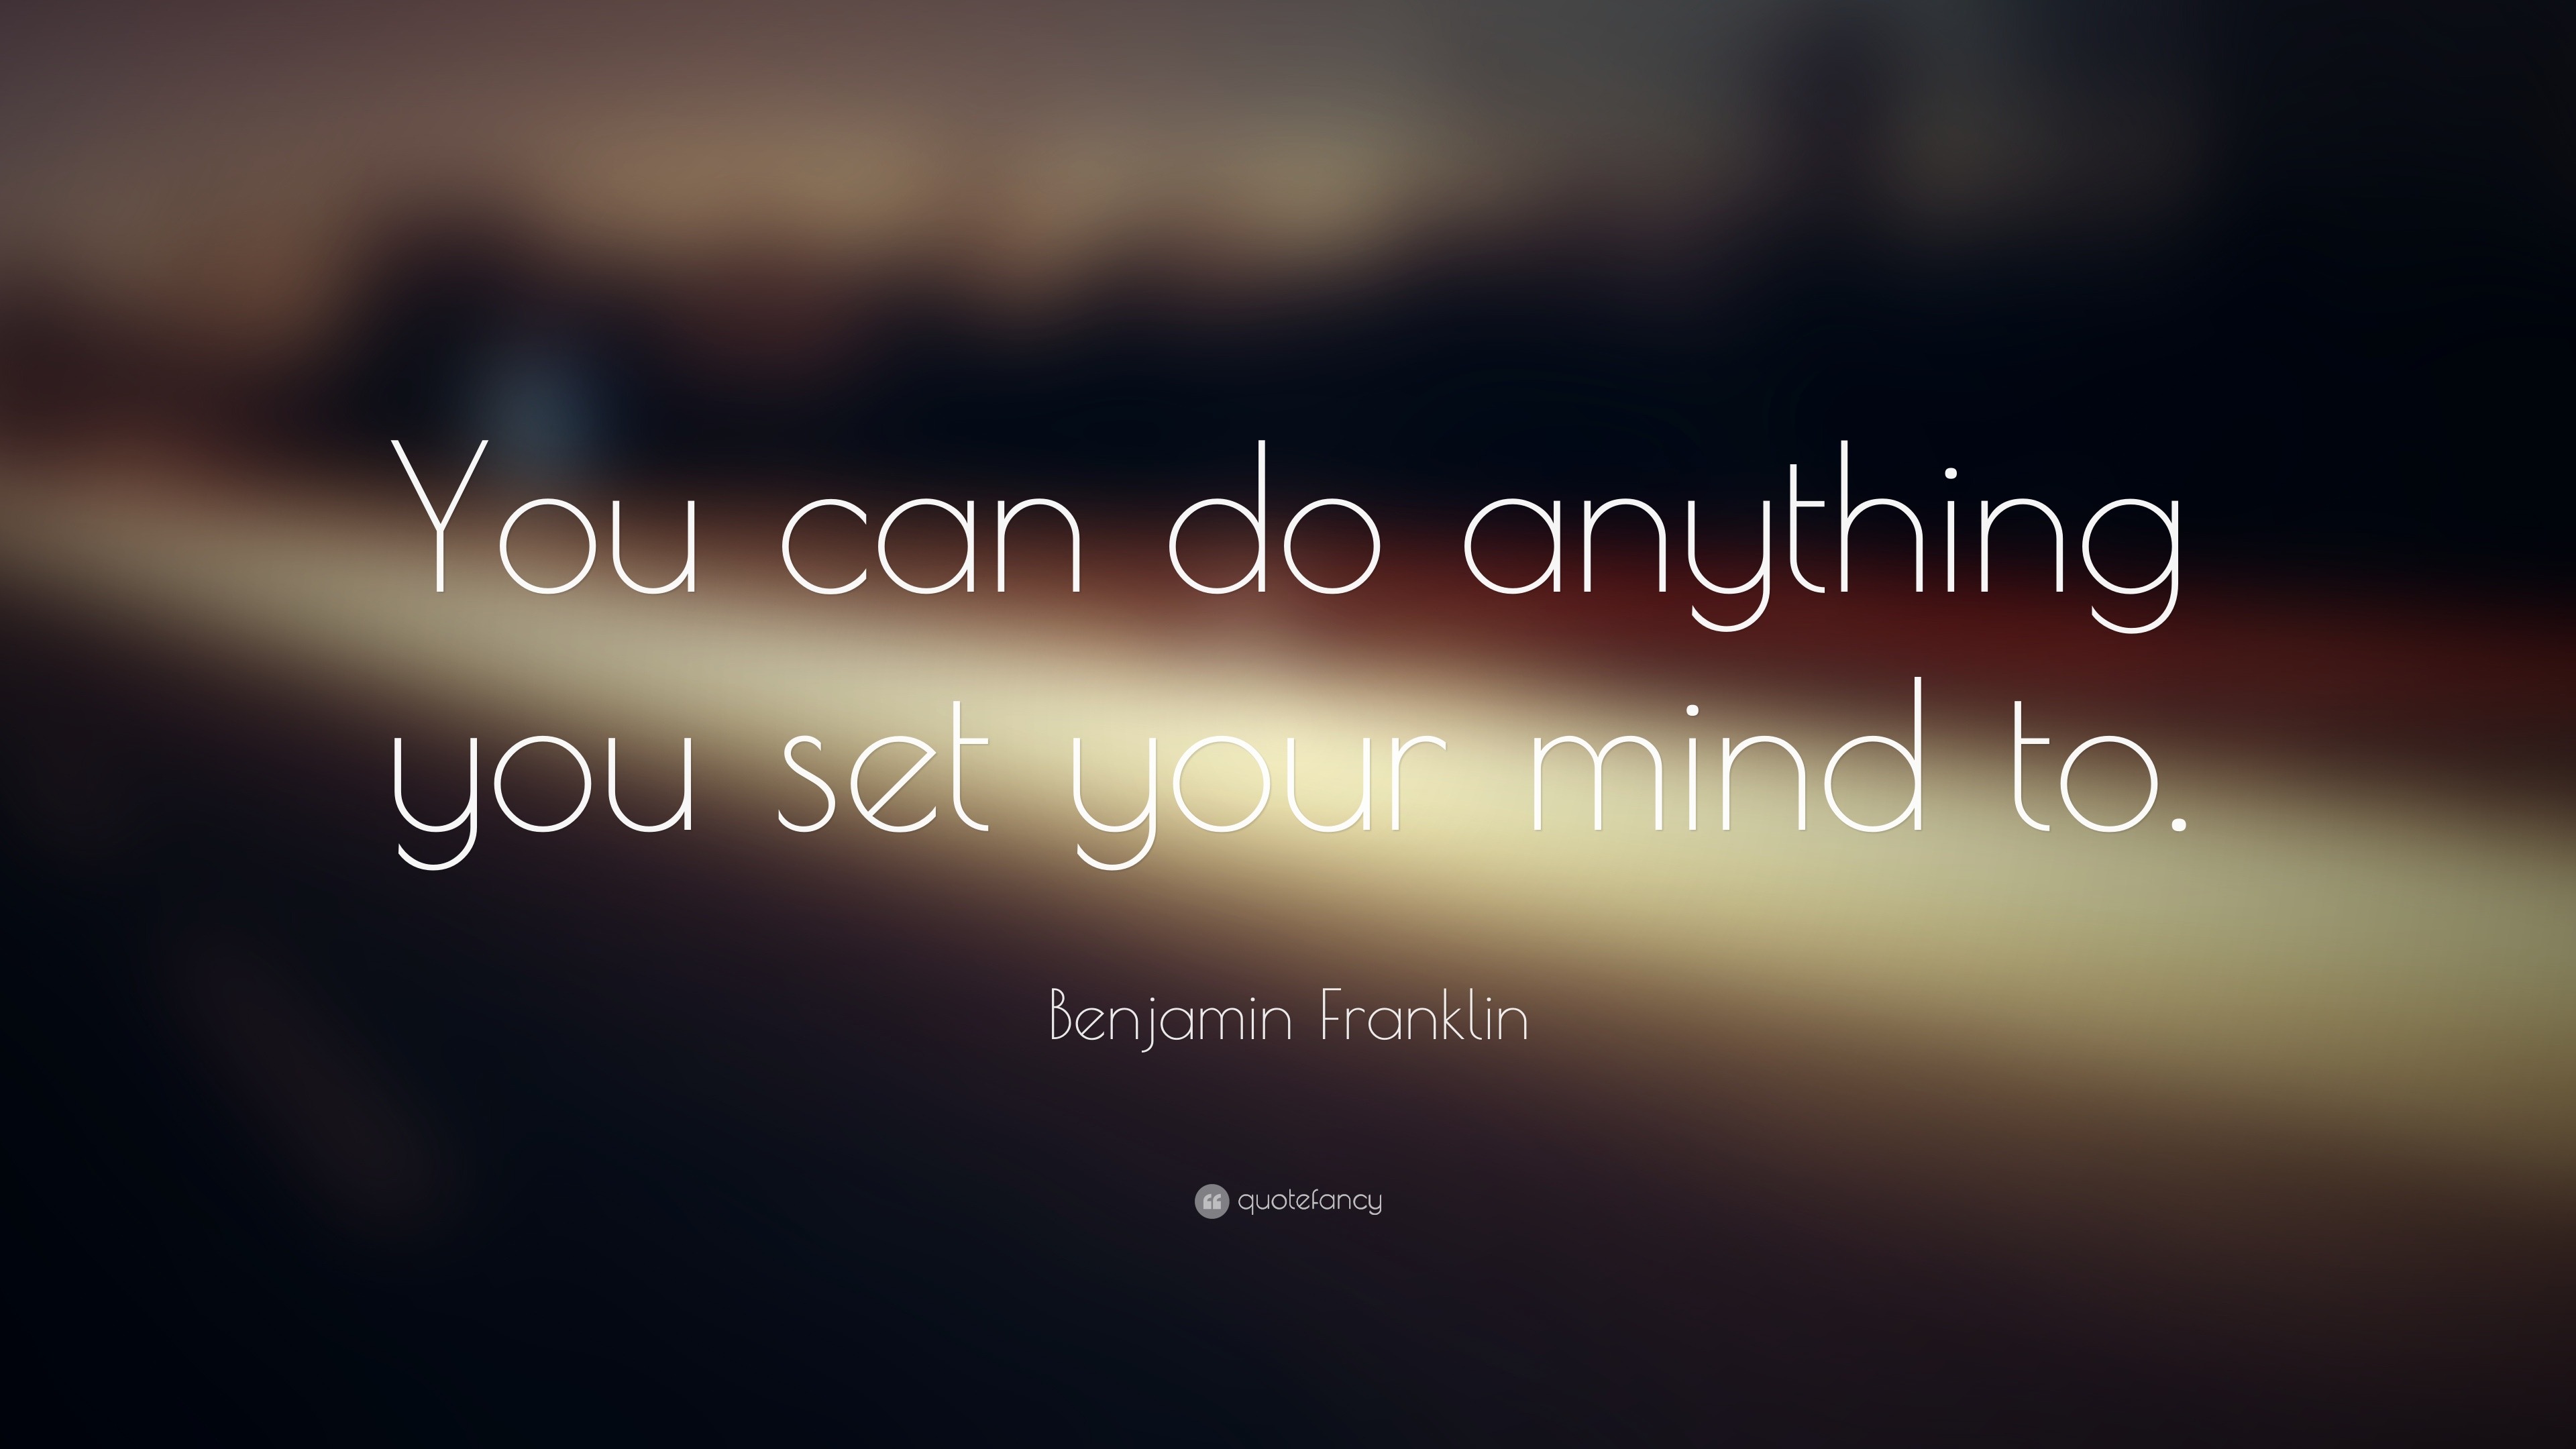 Benjamin Franklin Quote “you Can Do Anything You Set Your Mind To”